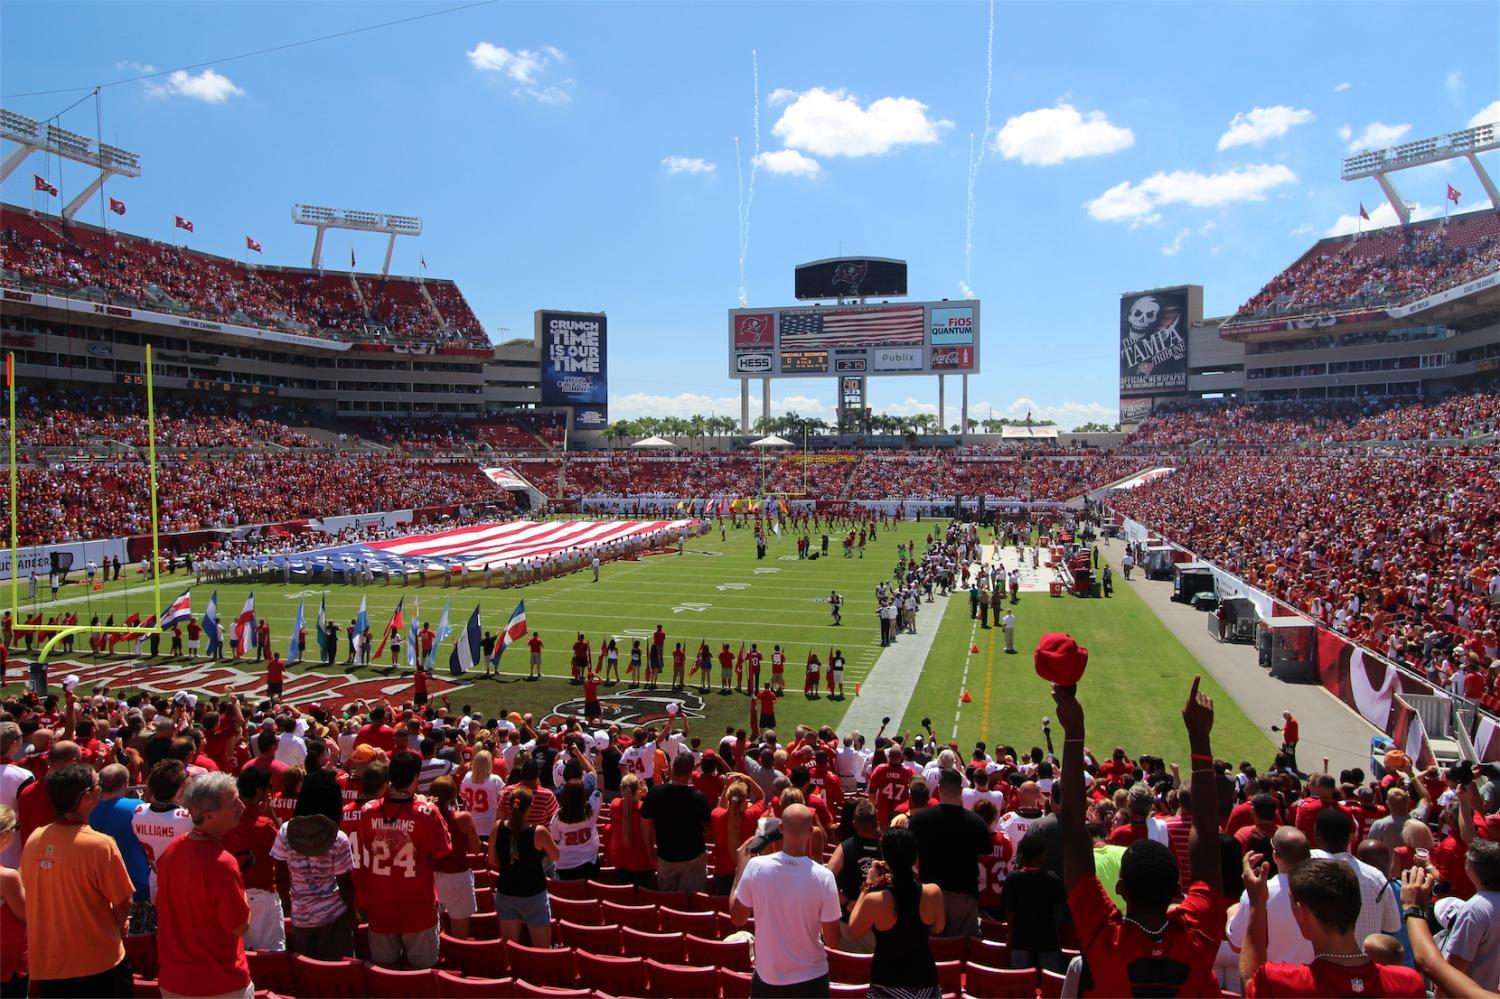 Tampa Bay Buccaneers vs. Miami Dolphins